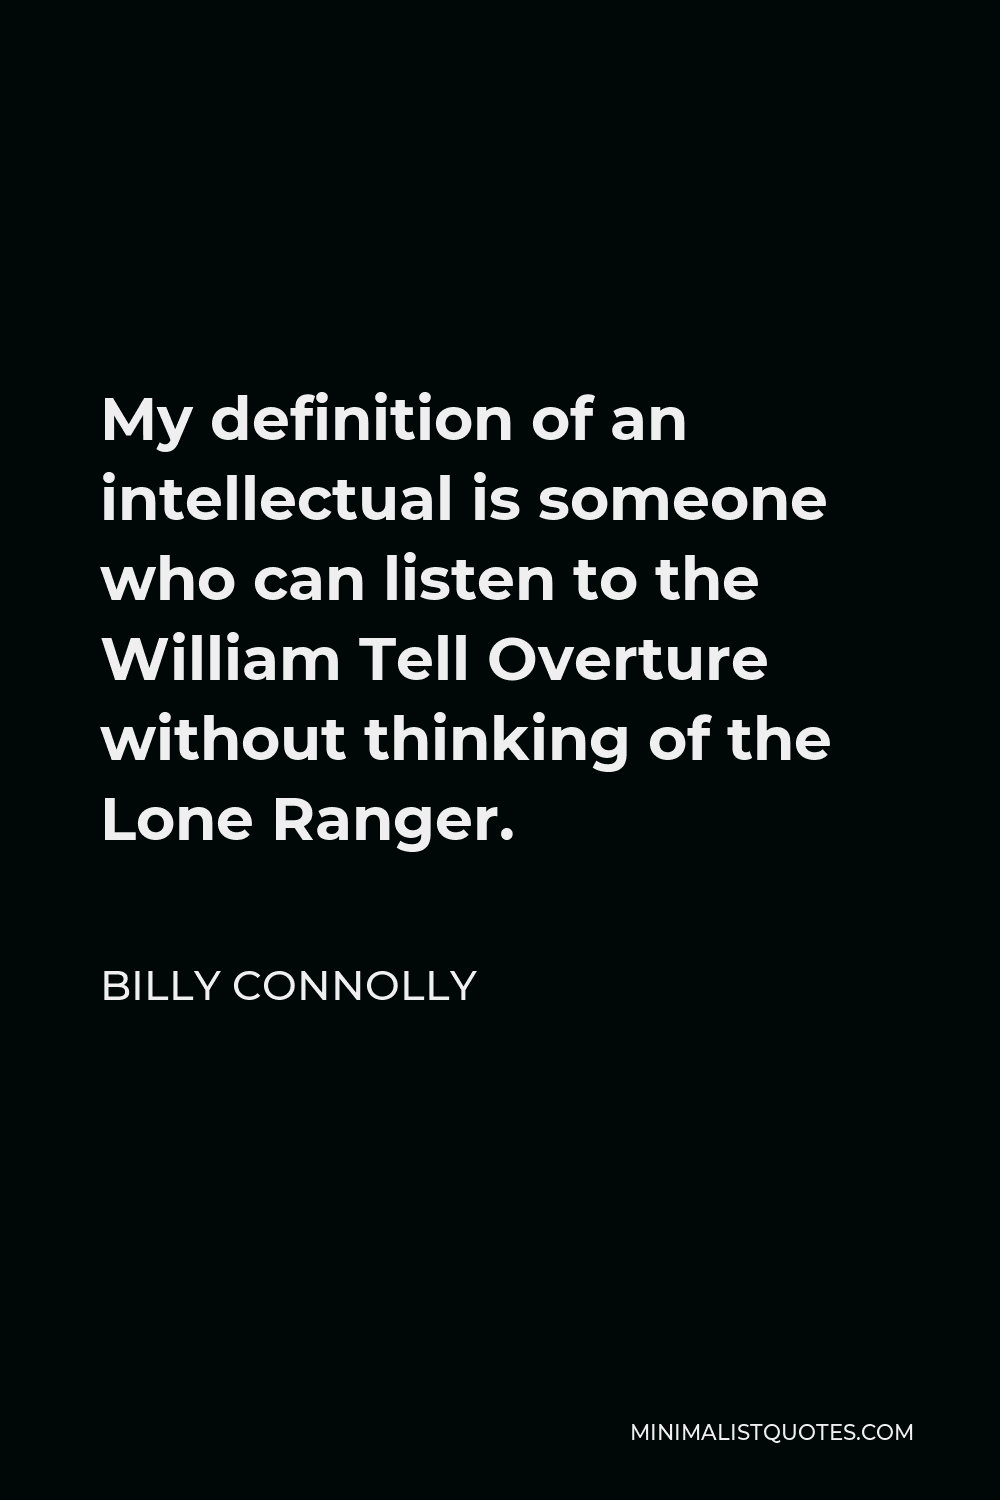 Billy Connolly Quote - My definition of an intellectual is someone who can listen to the William Tell Overture without thinking of the Lone Ranger.